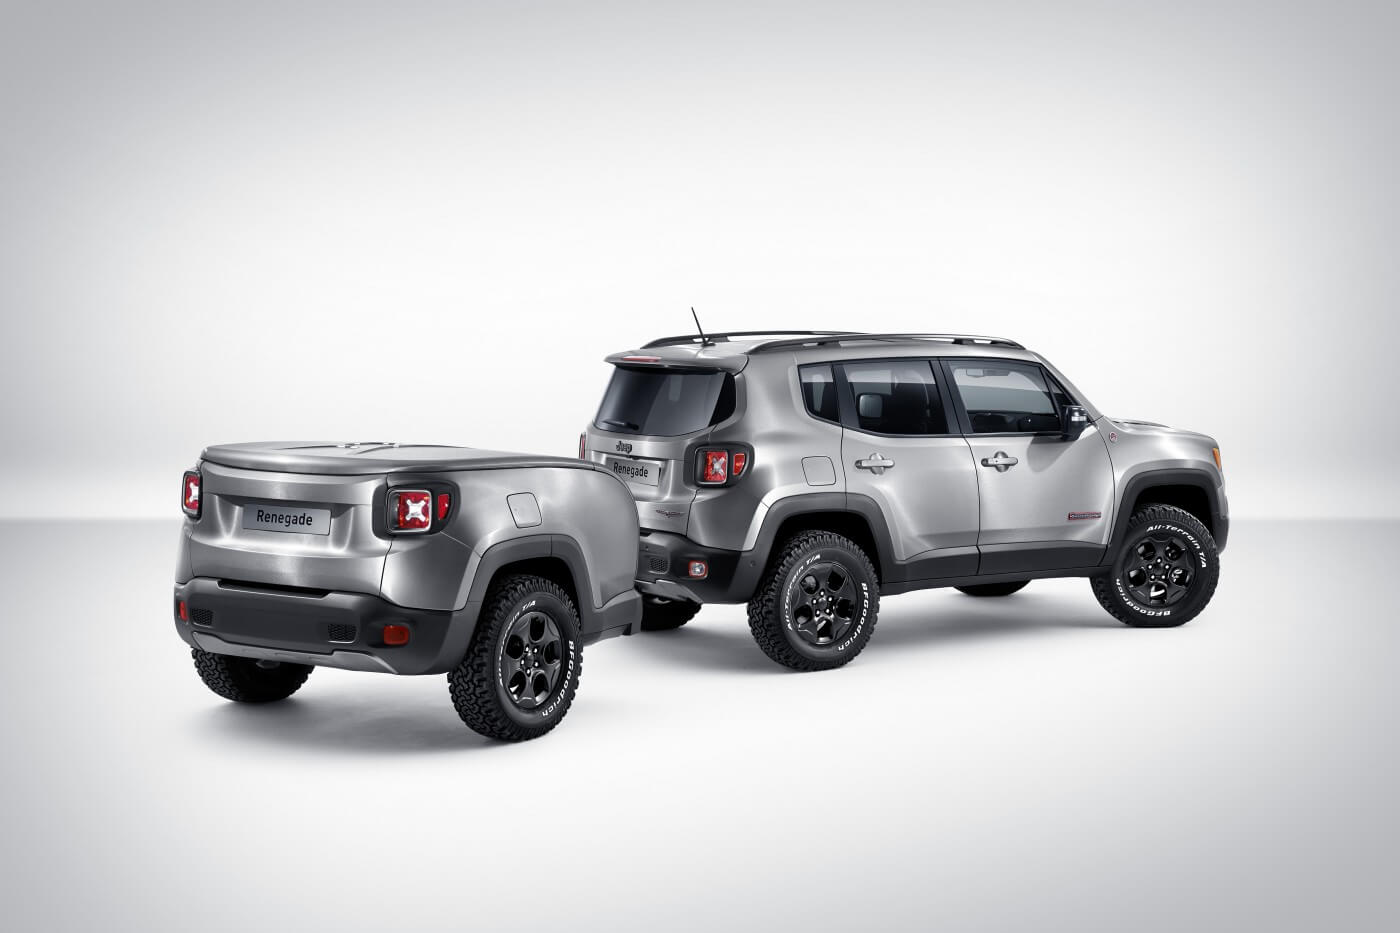 2015 Jeep Renegade Hard Steel concept revealed